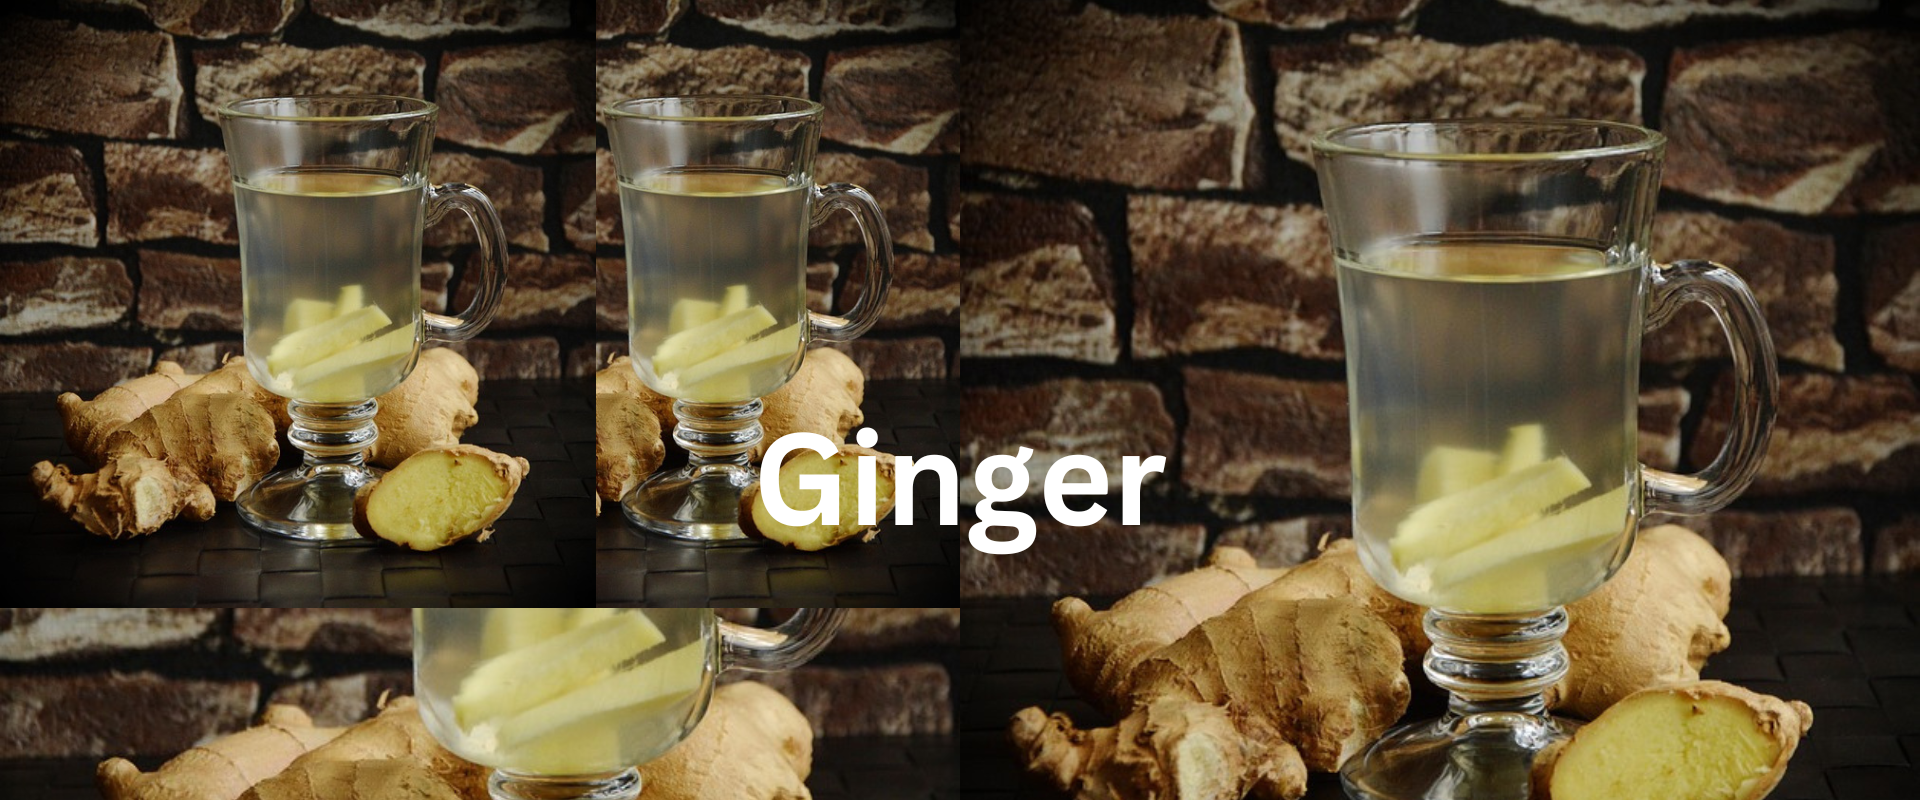 GINGER.Immediate-and-powerful-Solution-for-gastric-problem